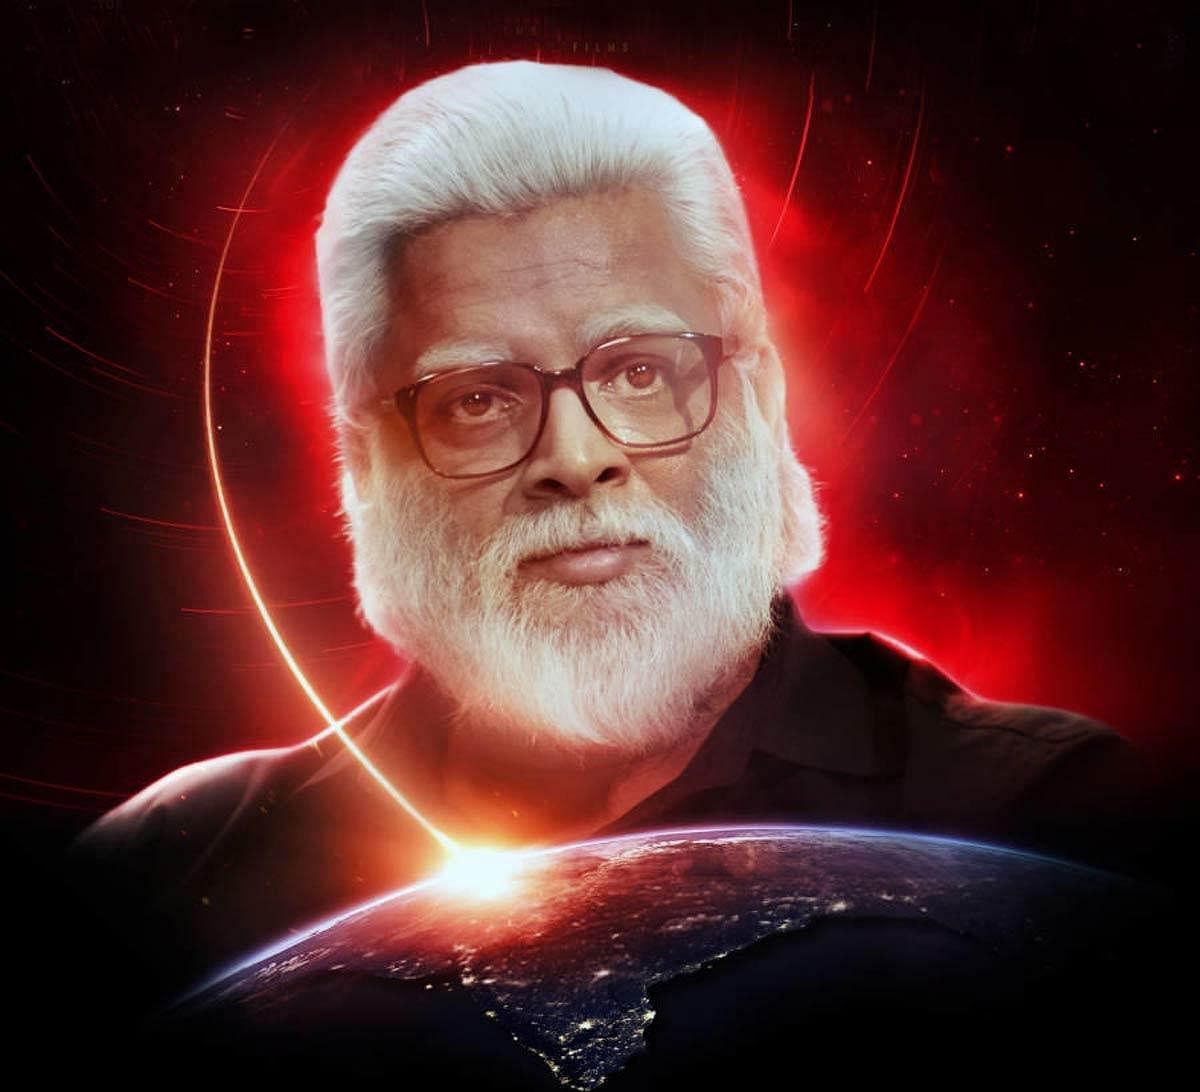 In ‘Rocketry’, Nambi Narayanan is repeatedly eulogised for his brilliance and he refuses a job at NASA because of his feelings for India.